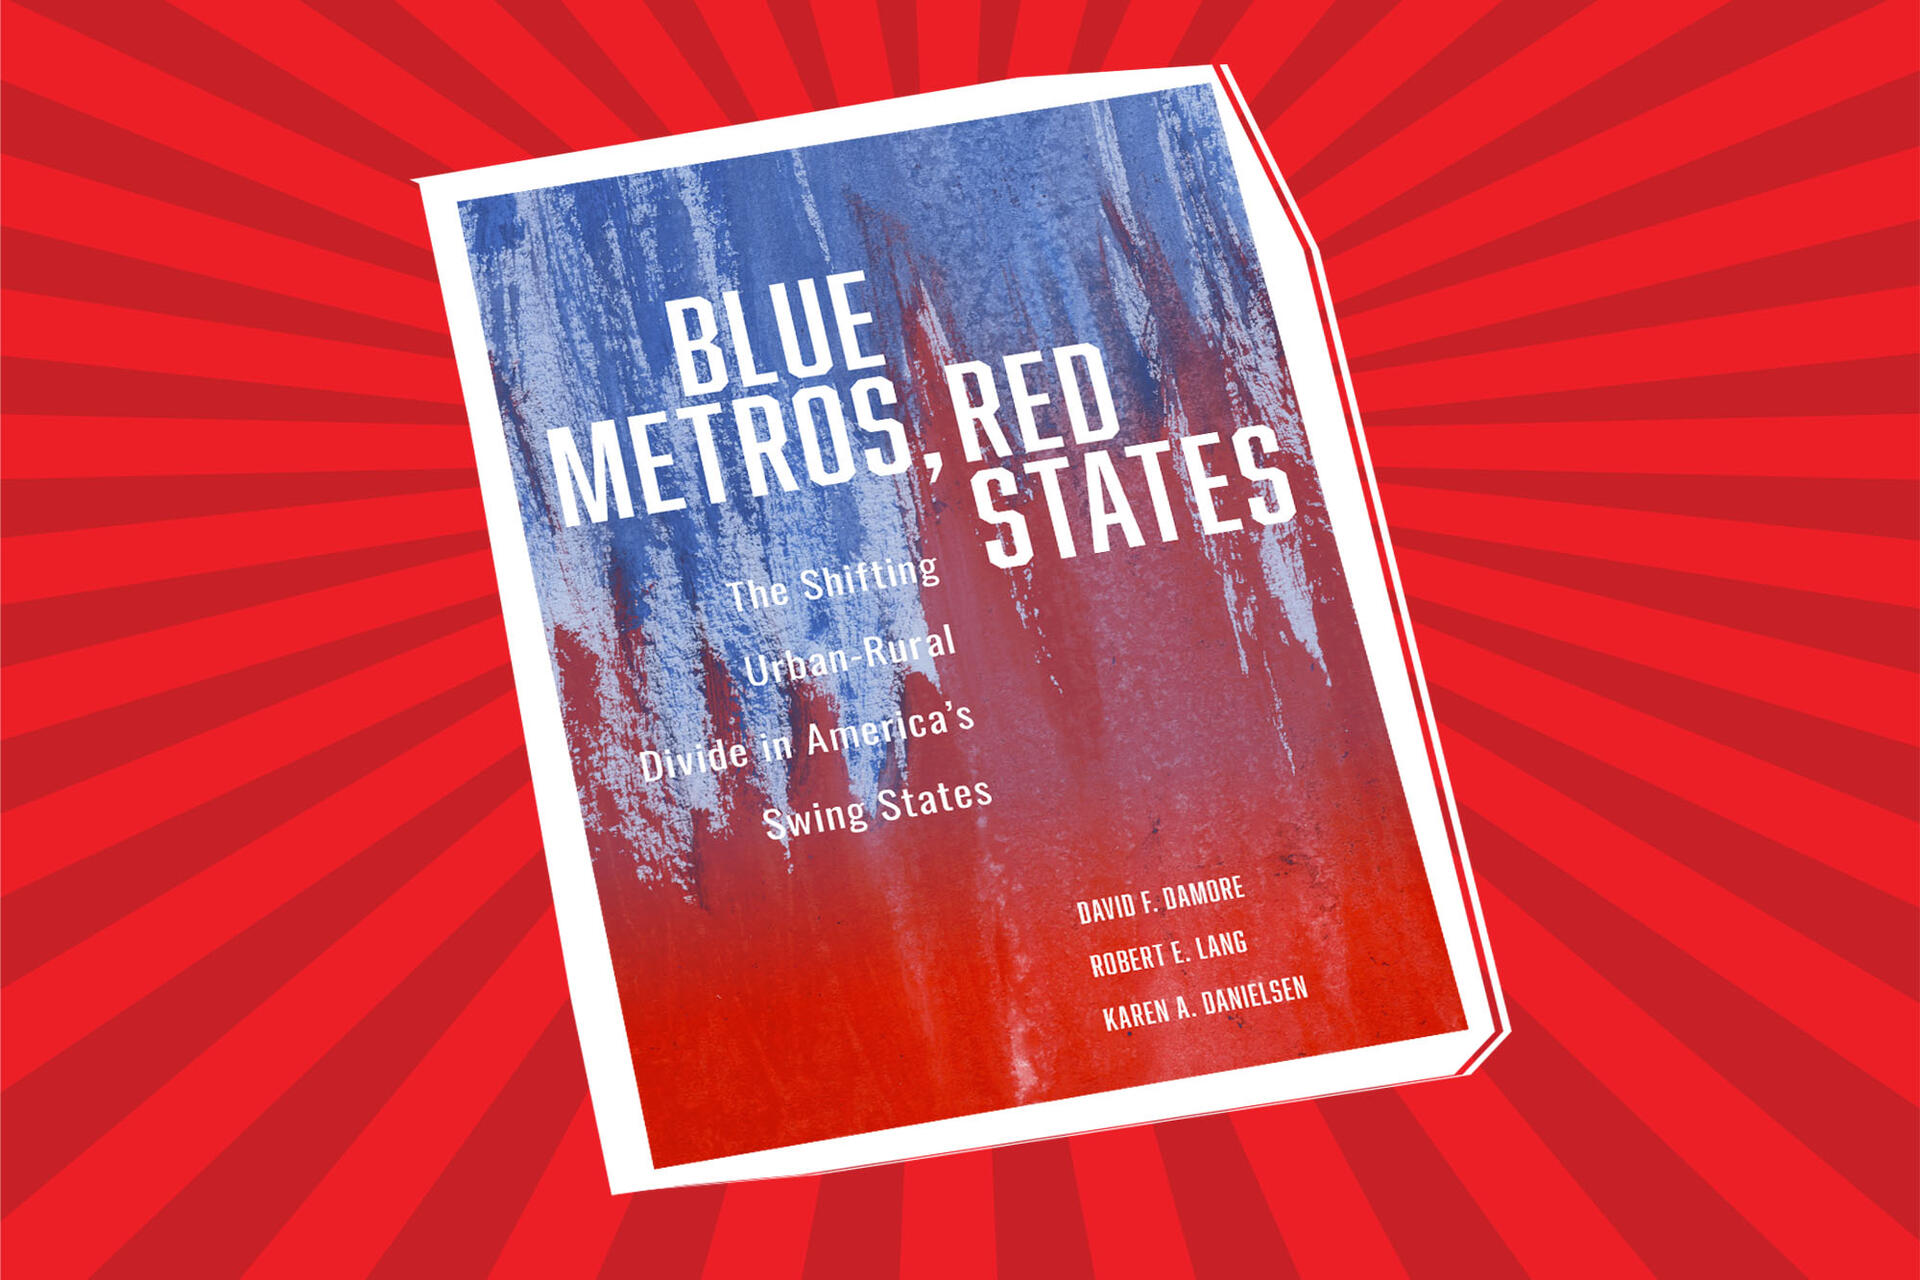 Blue Metros, Red States: America's Suburbs and the New Battleground in Presidential Politics | University of Nevada, Las Vegas